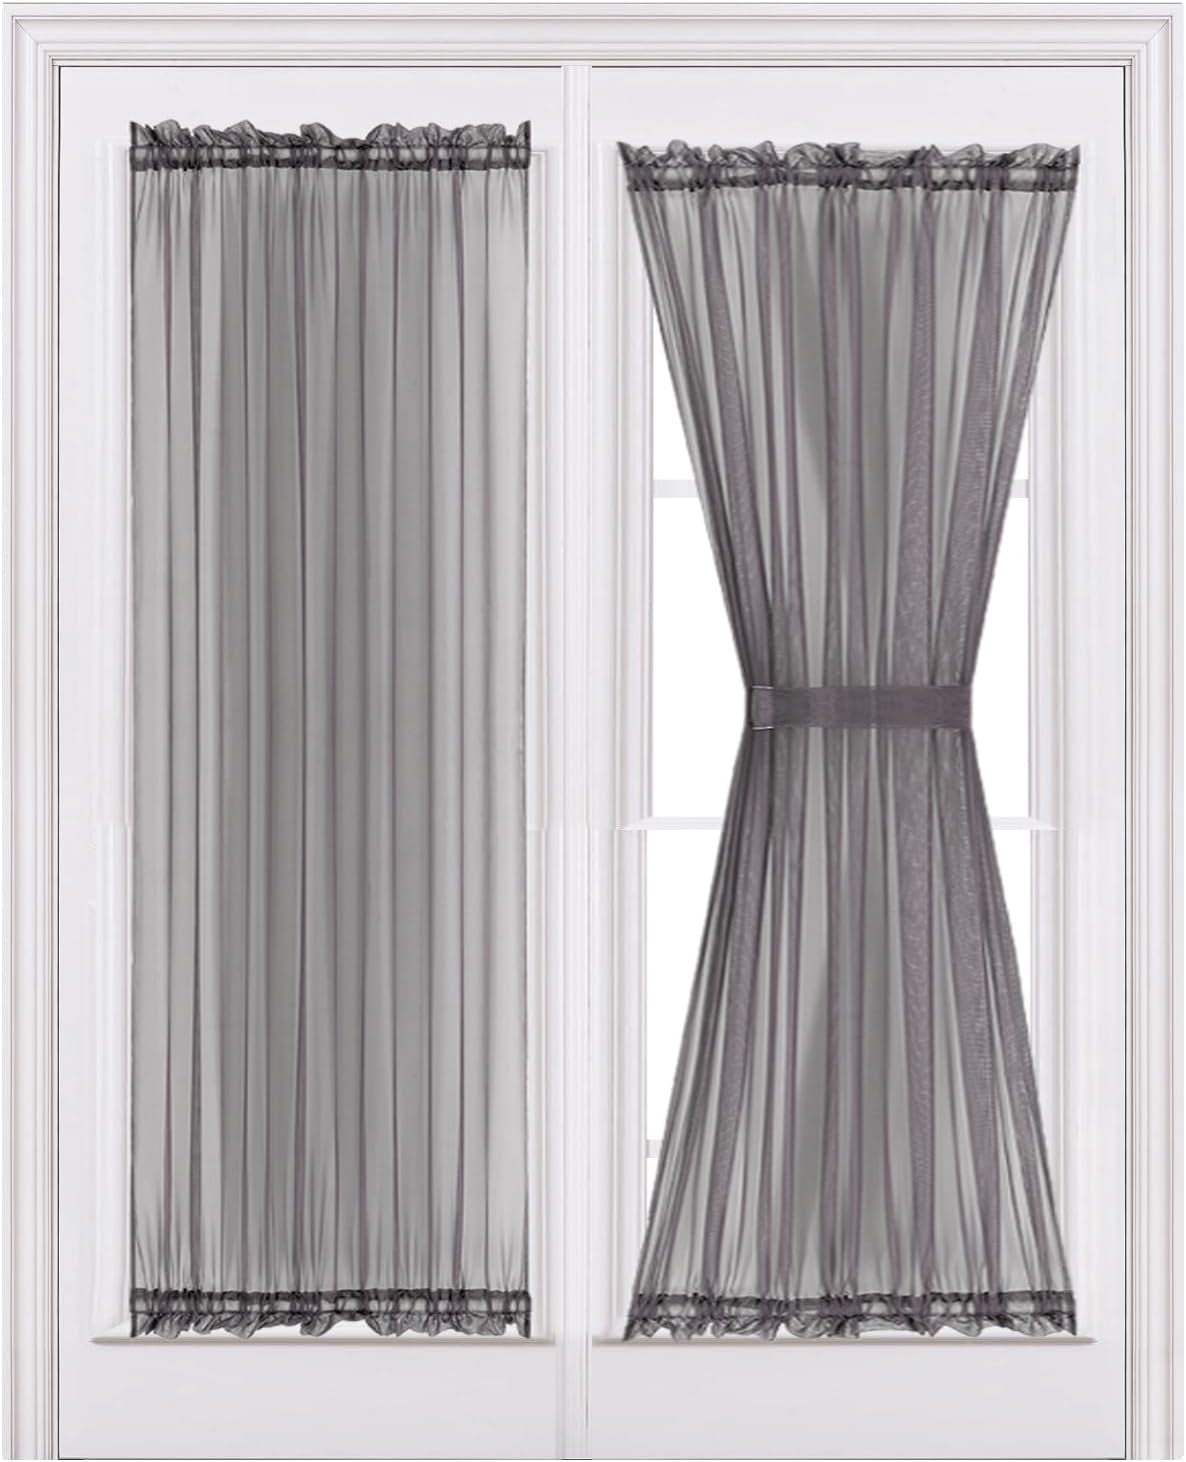 MIULEE French Door Sheer Curtains for Front Back Patio Glass Door Light Filtering Window Treatment with 2 Tiebacks 54 Wide and 72 Inches Length, White, Set of 2  MIULEE Dark Grey 40"W X 72"L 